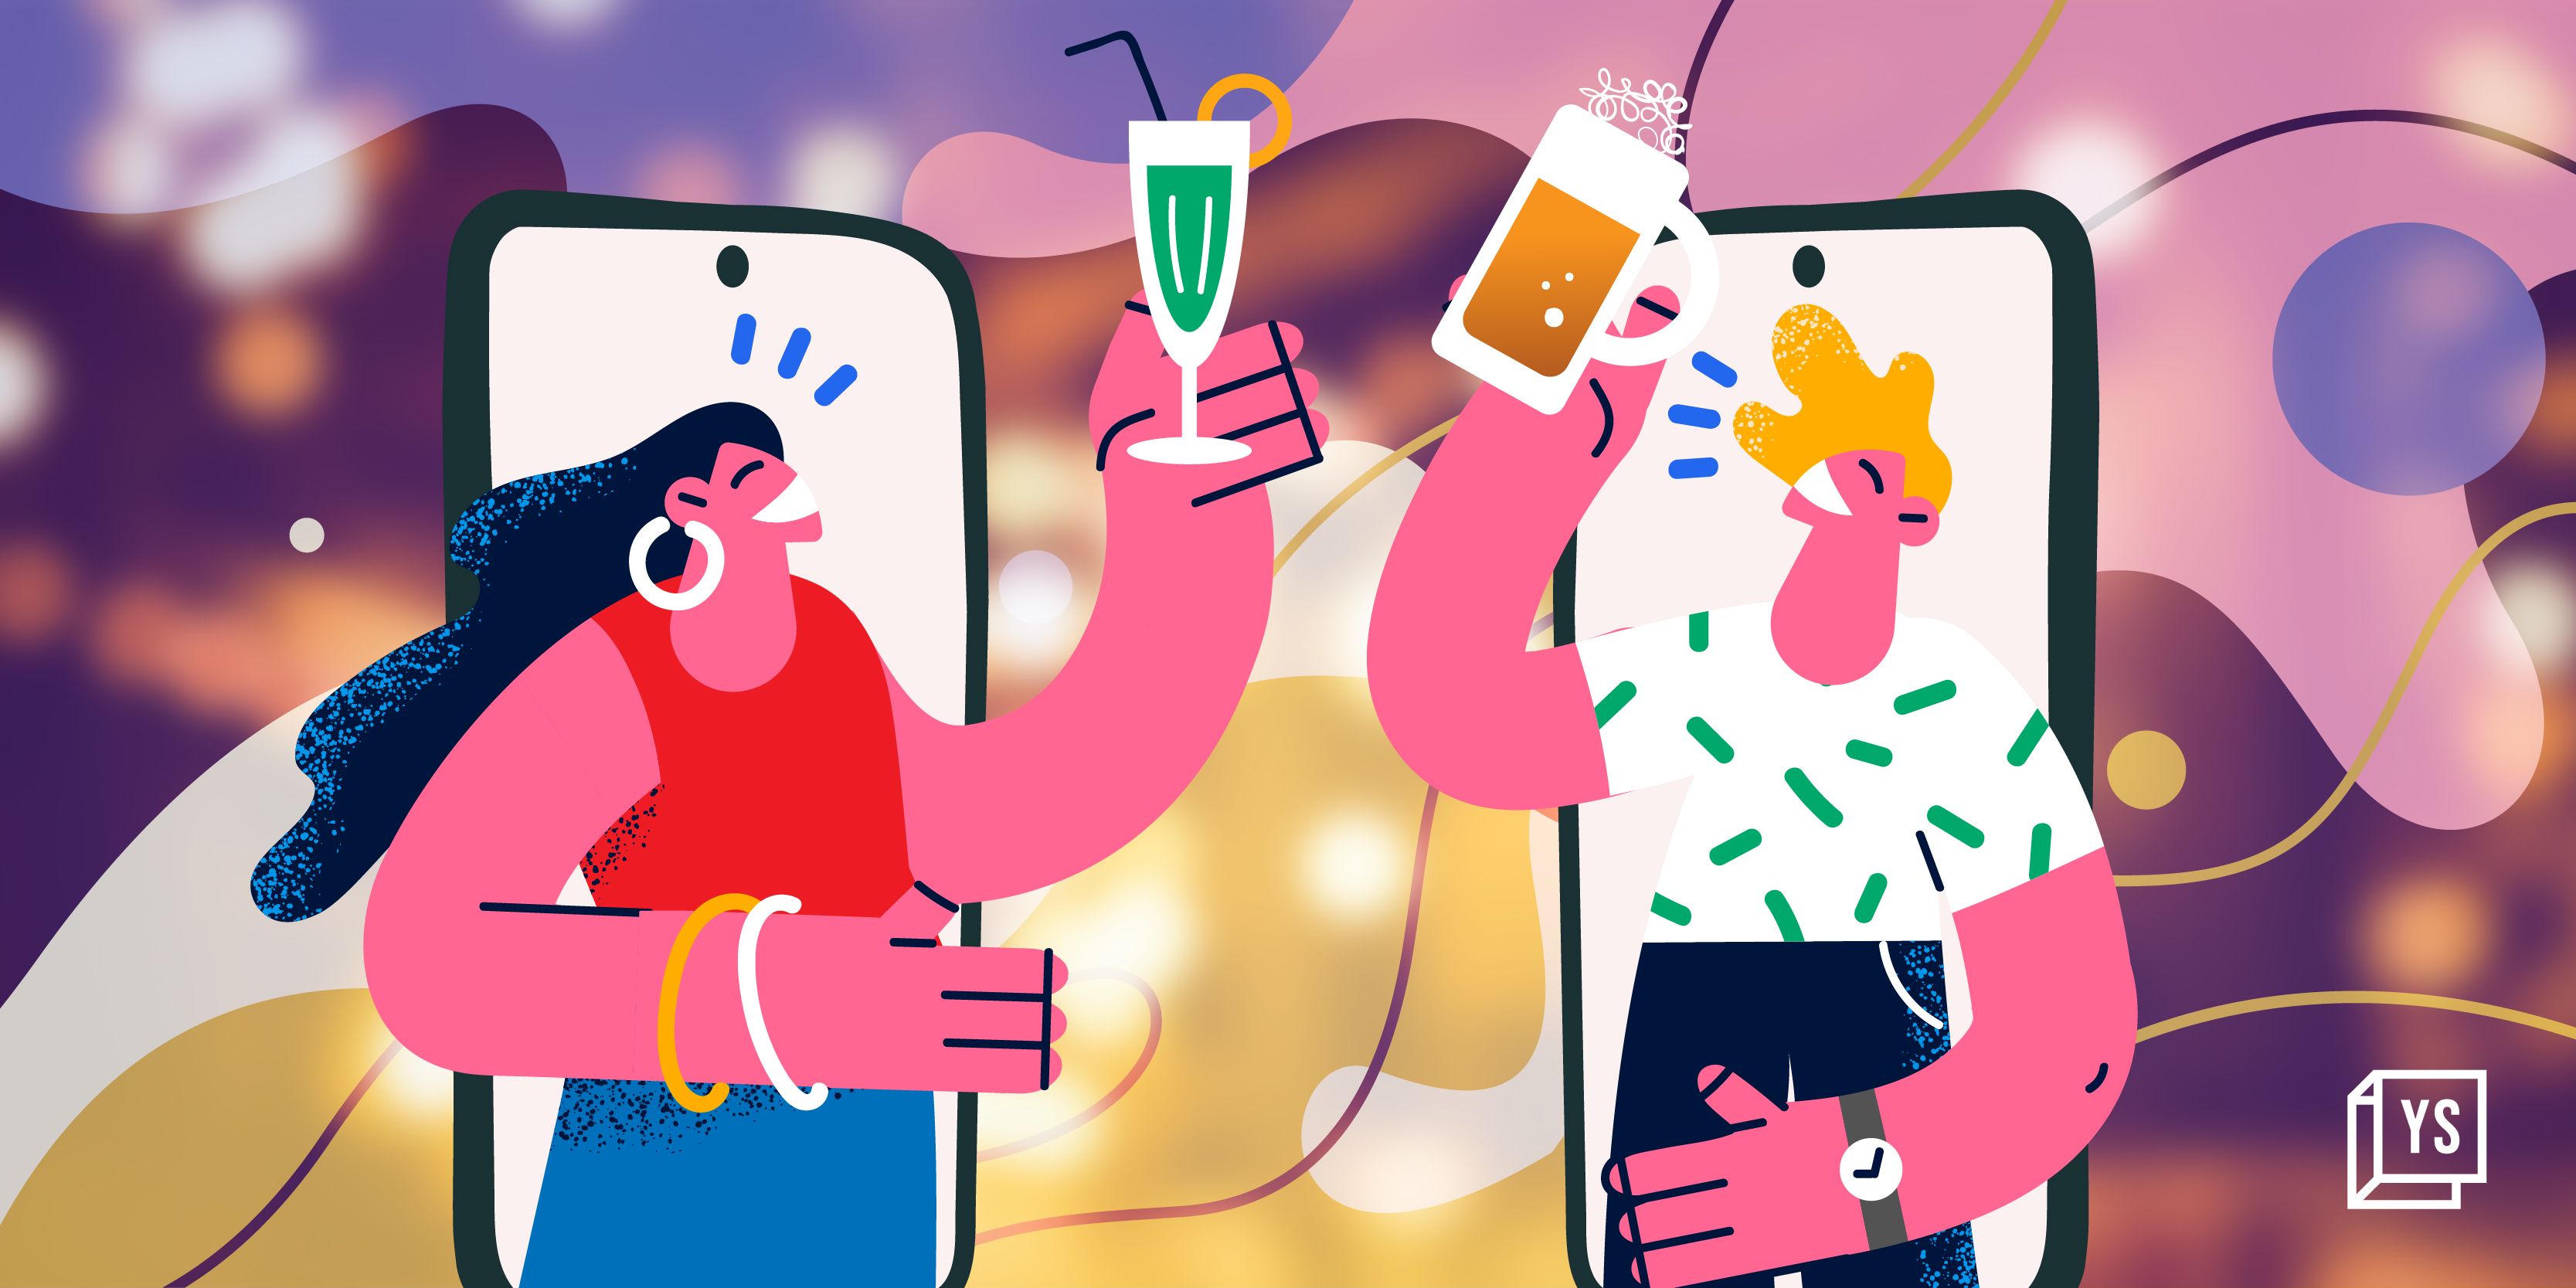 Alcohol influencers are raising the bar with innovative content and liquor brands are loving them